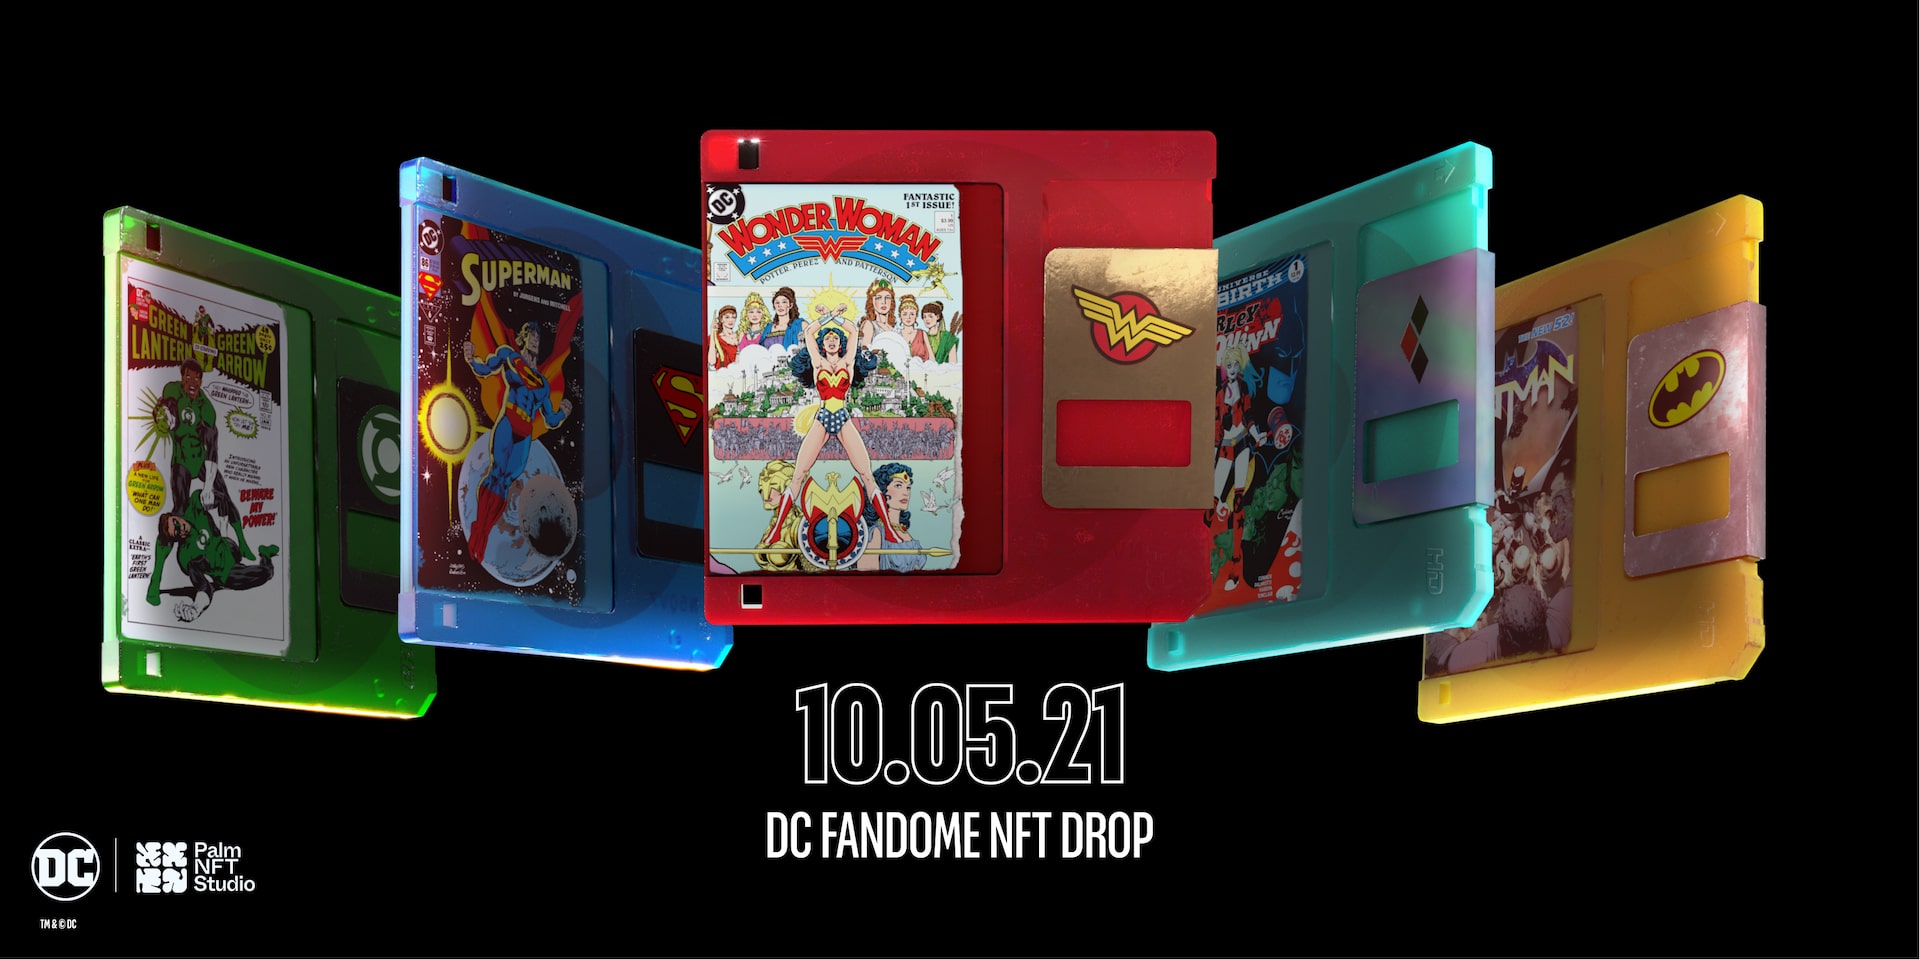 DC Comics launching inaugural NFT collection October 5th